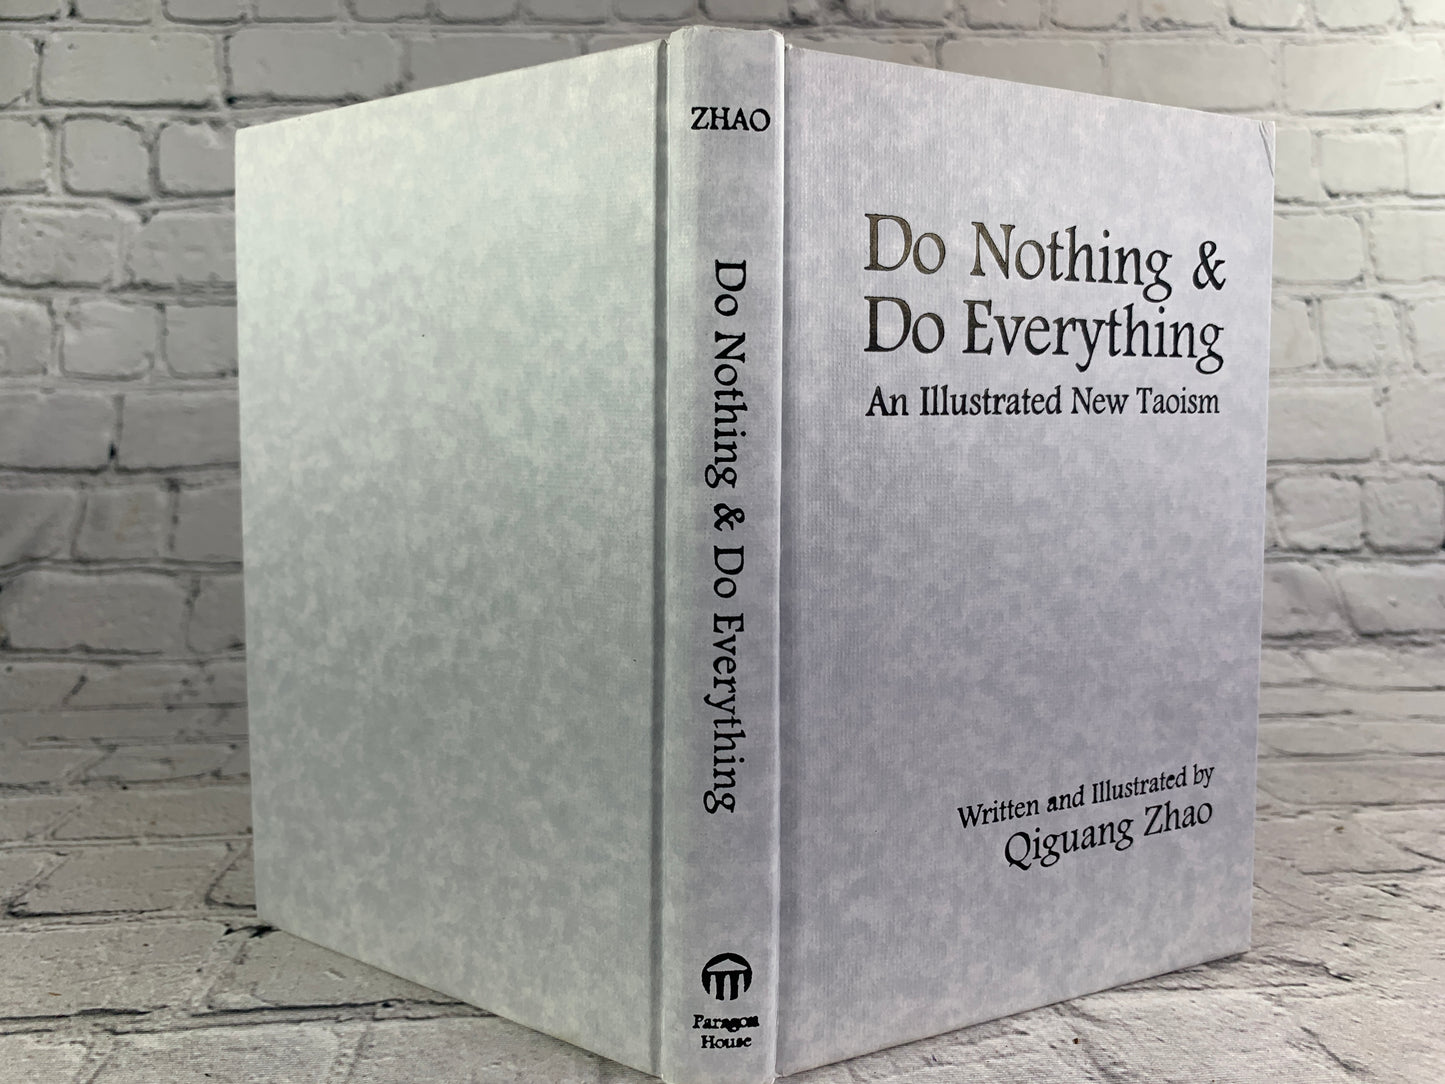 Do Nothing & Do Everything: An Illustrated New Taoism by Qiguang Zhao [2010]